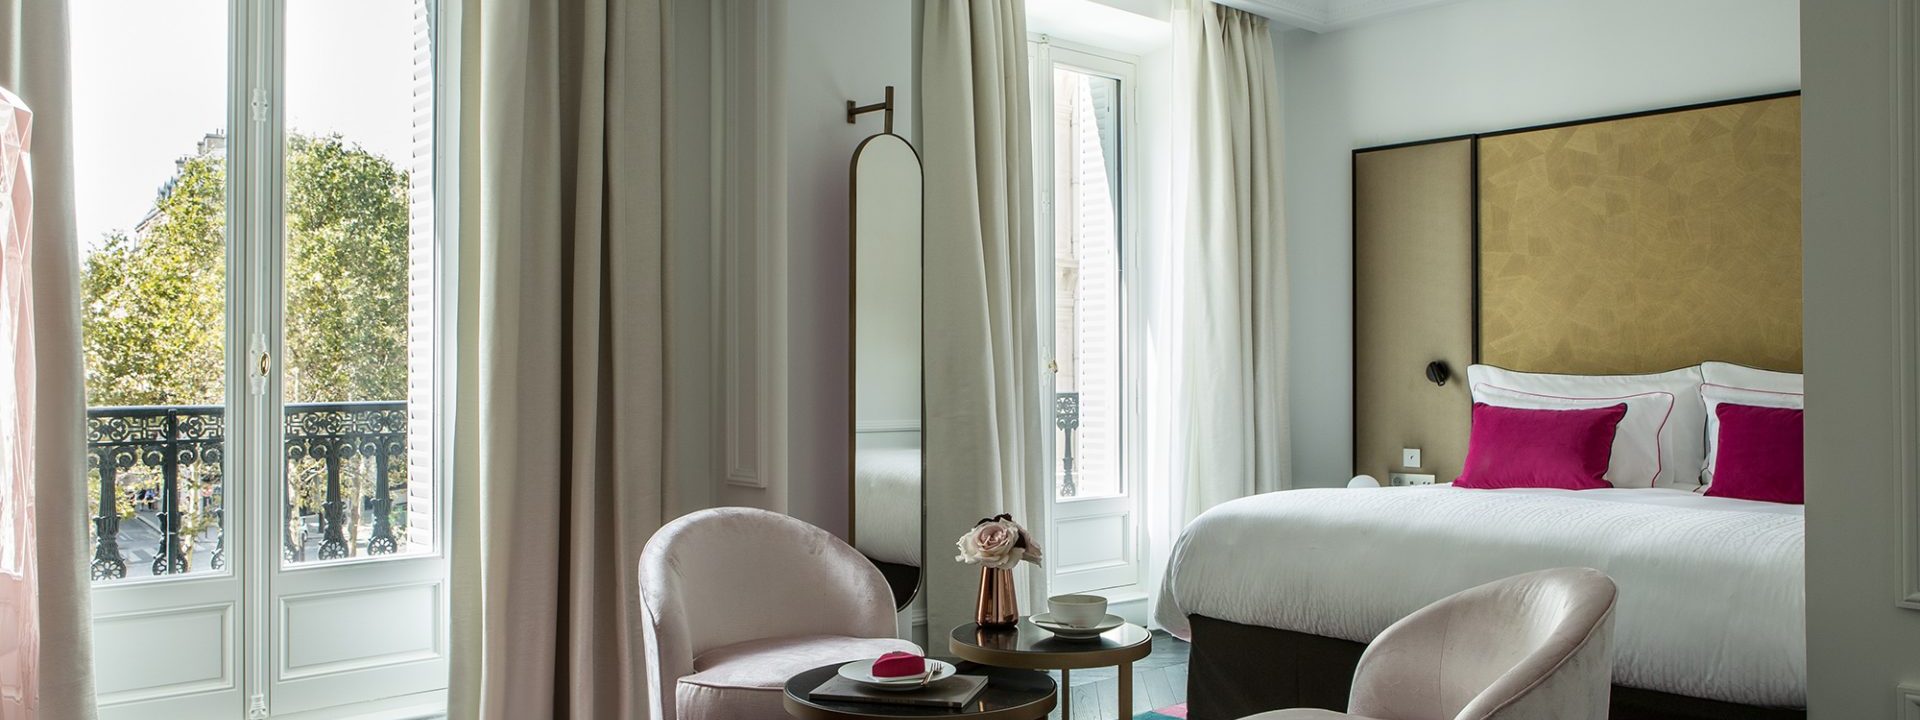 Your stay will be a sweet one at the newly-opened Fauchon L’hôtel Paris